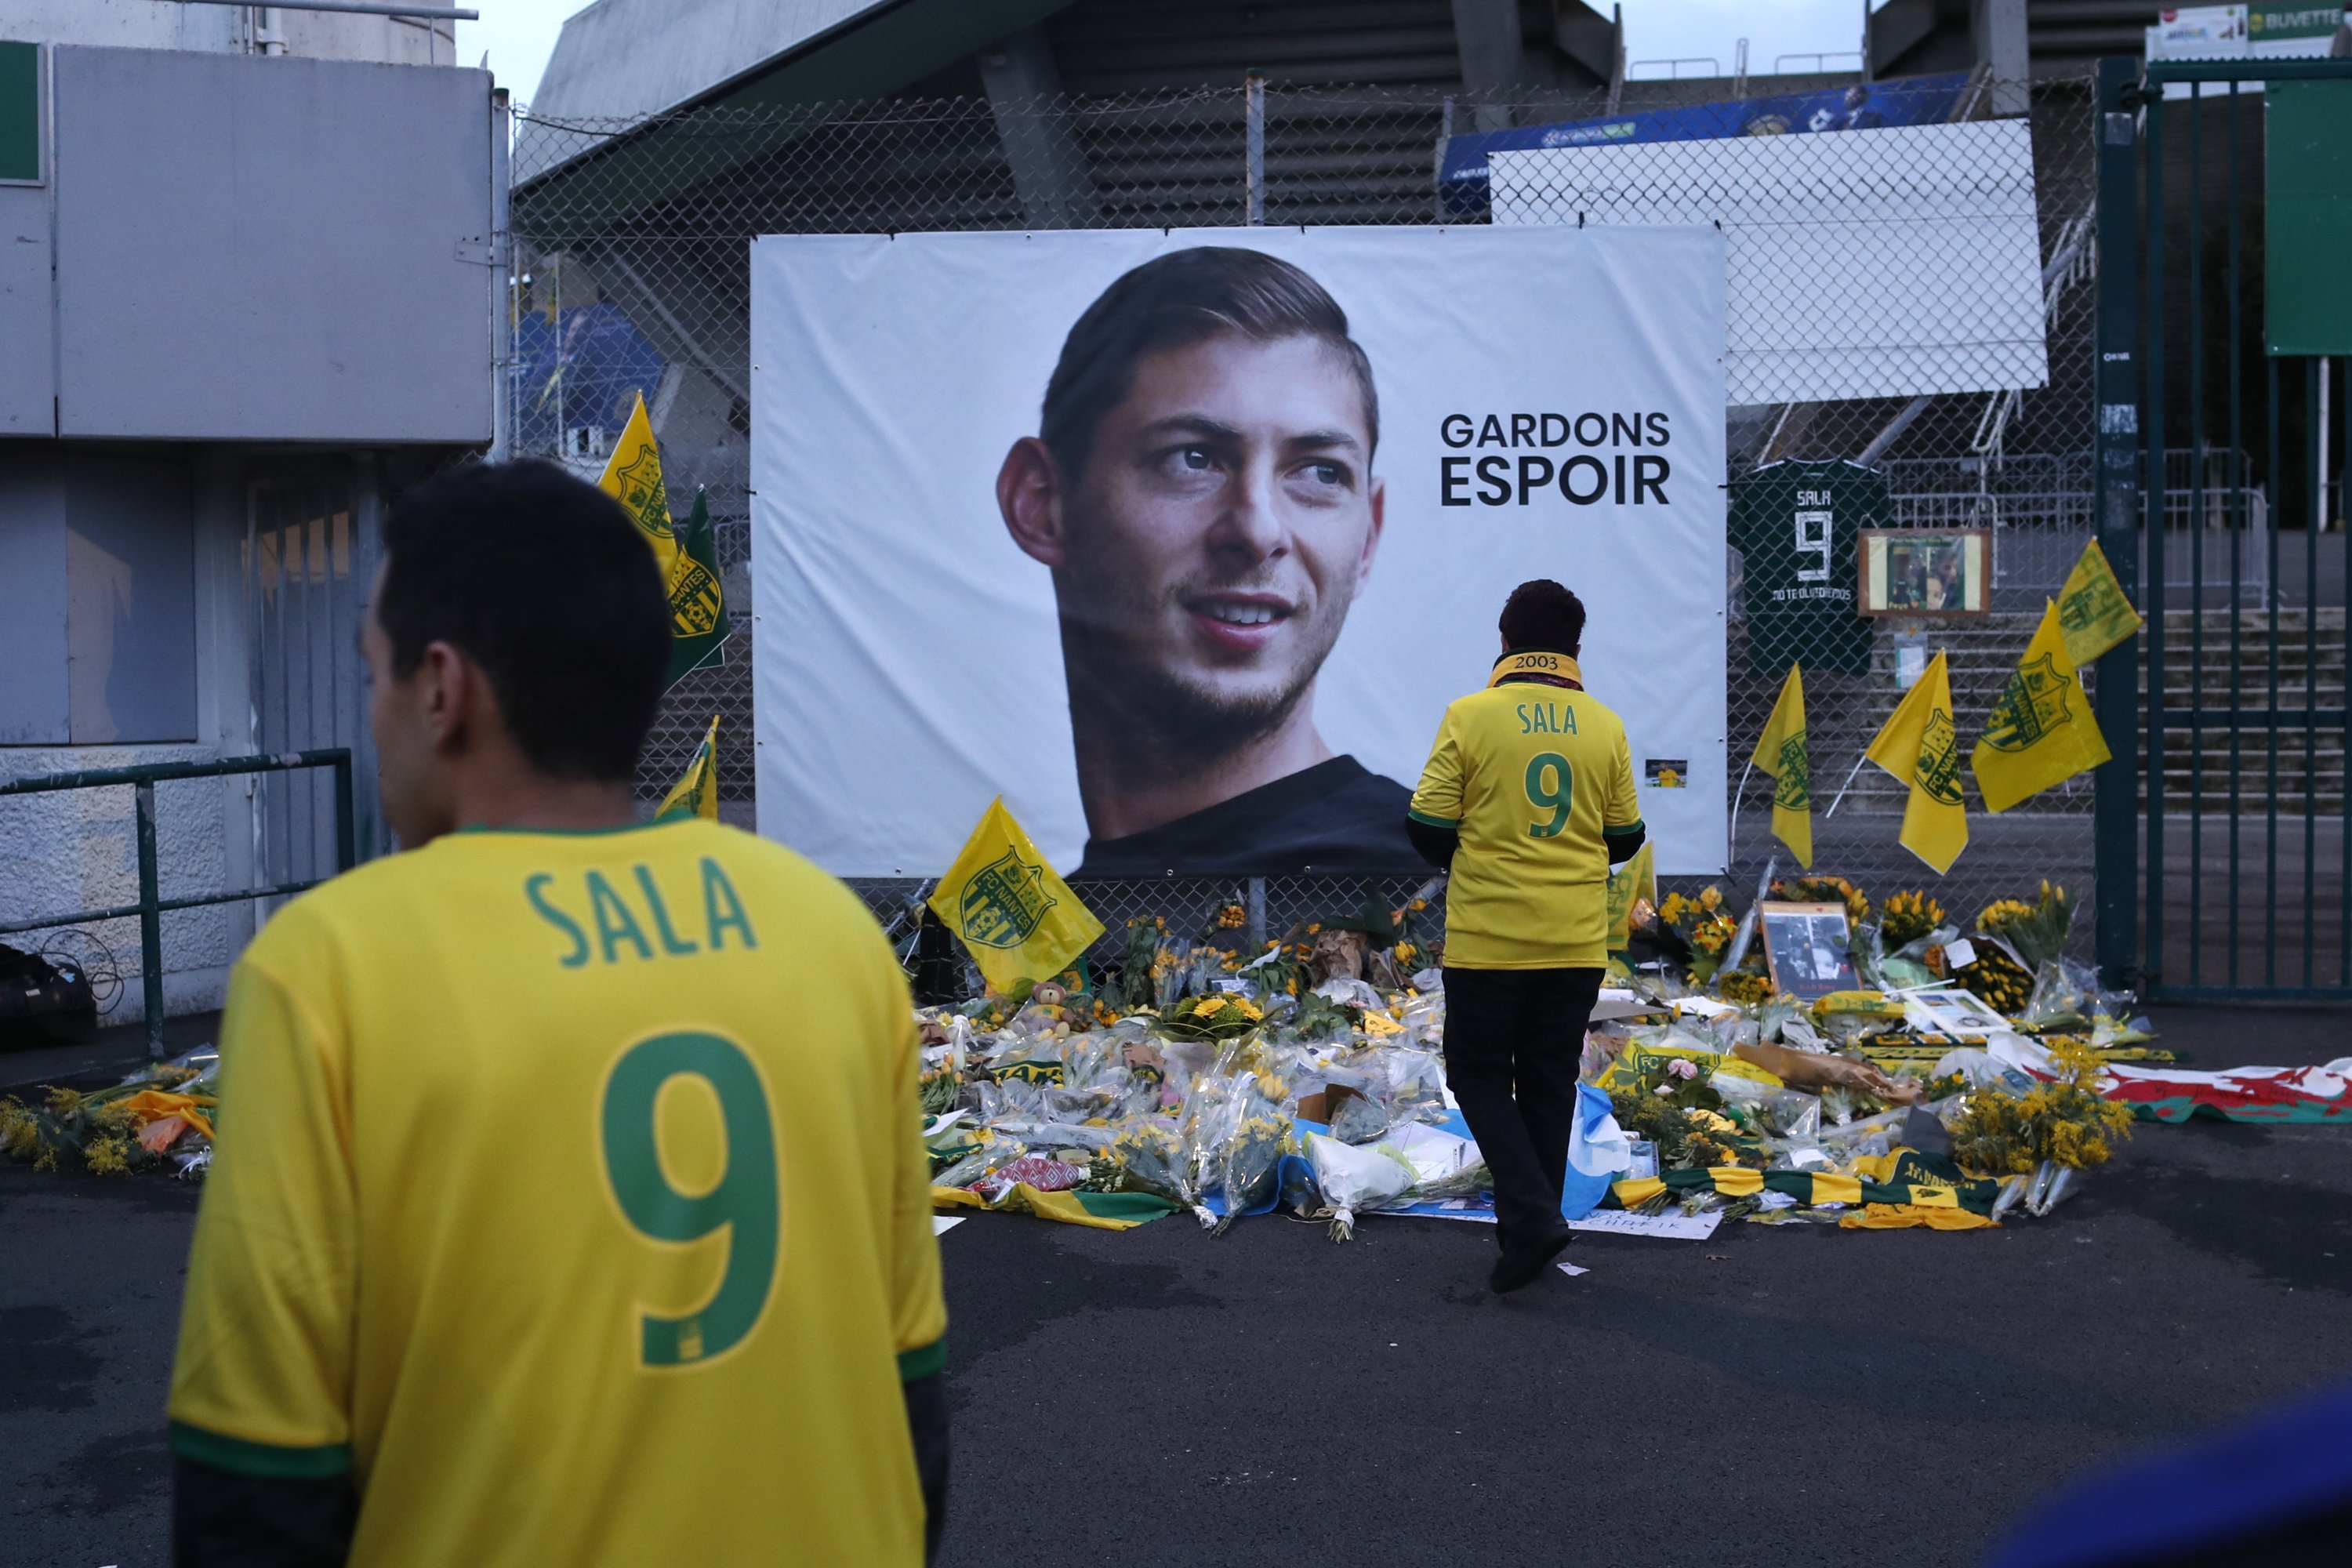 Nantes supporters stand by a poster of Argentinian player Emiliano Sala and reading 'Let's keep hope' outside La Beaujoire stadium in Nantes, western France, Jan. 30, 2019. (AP Photo)